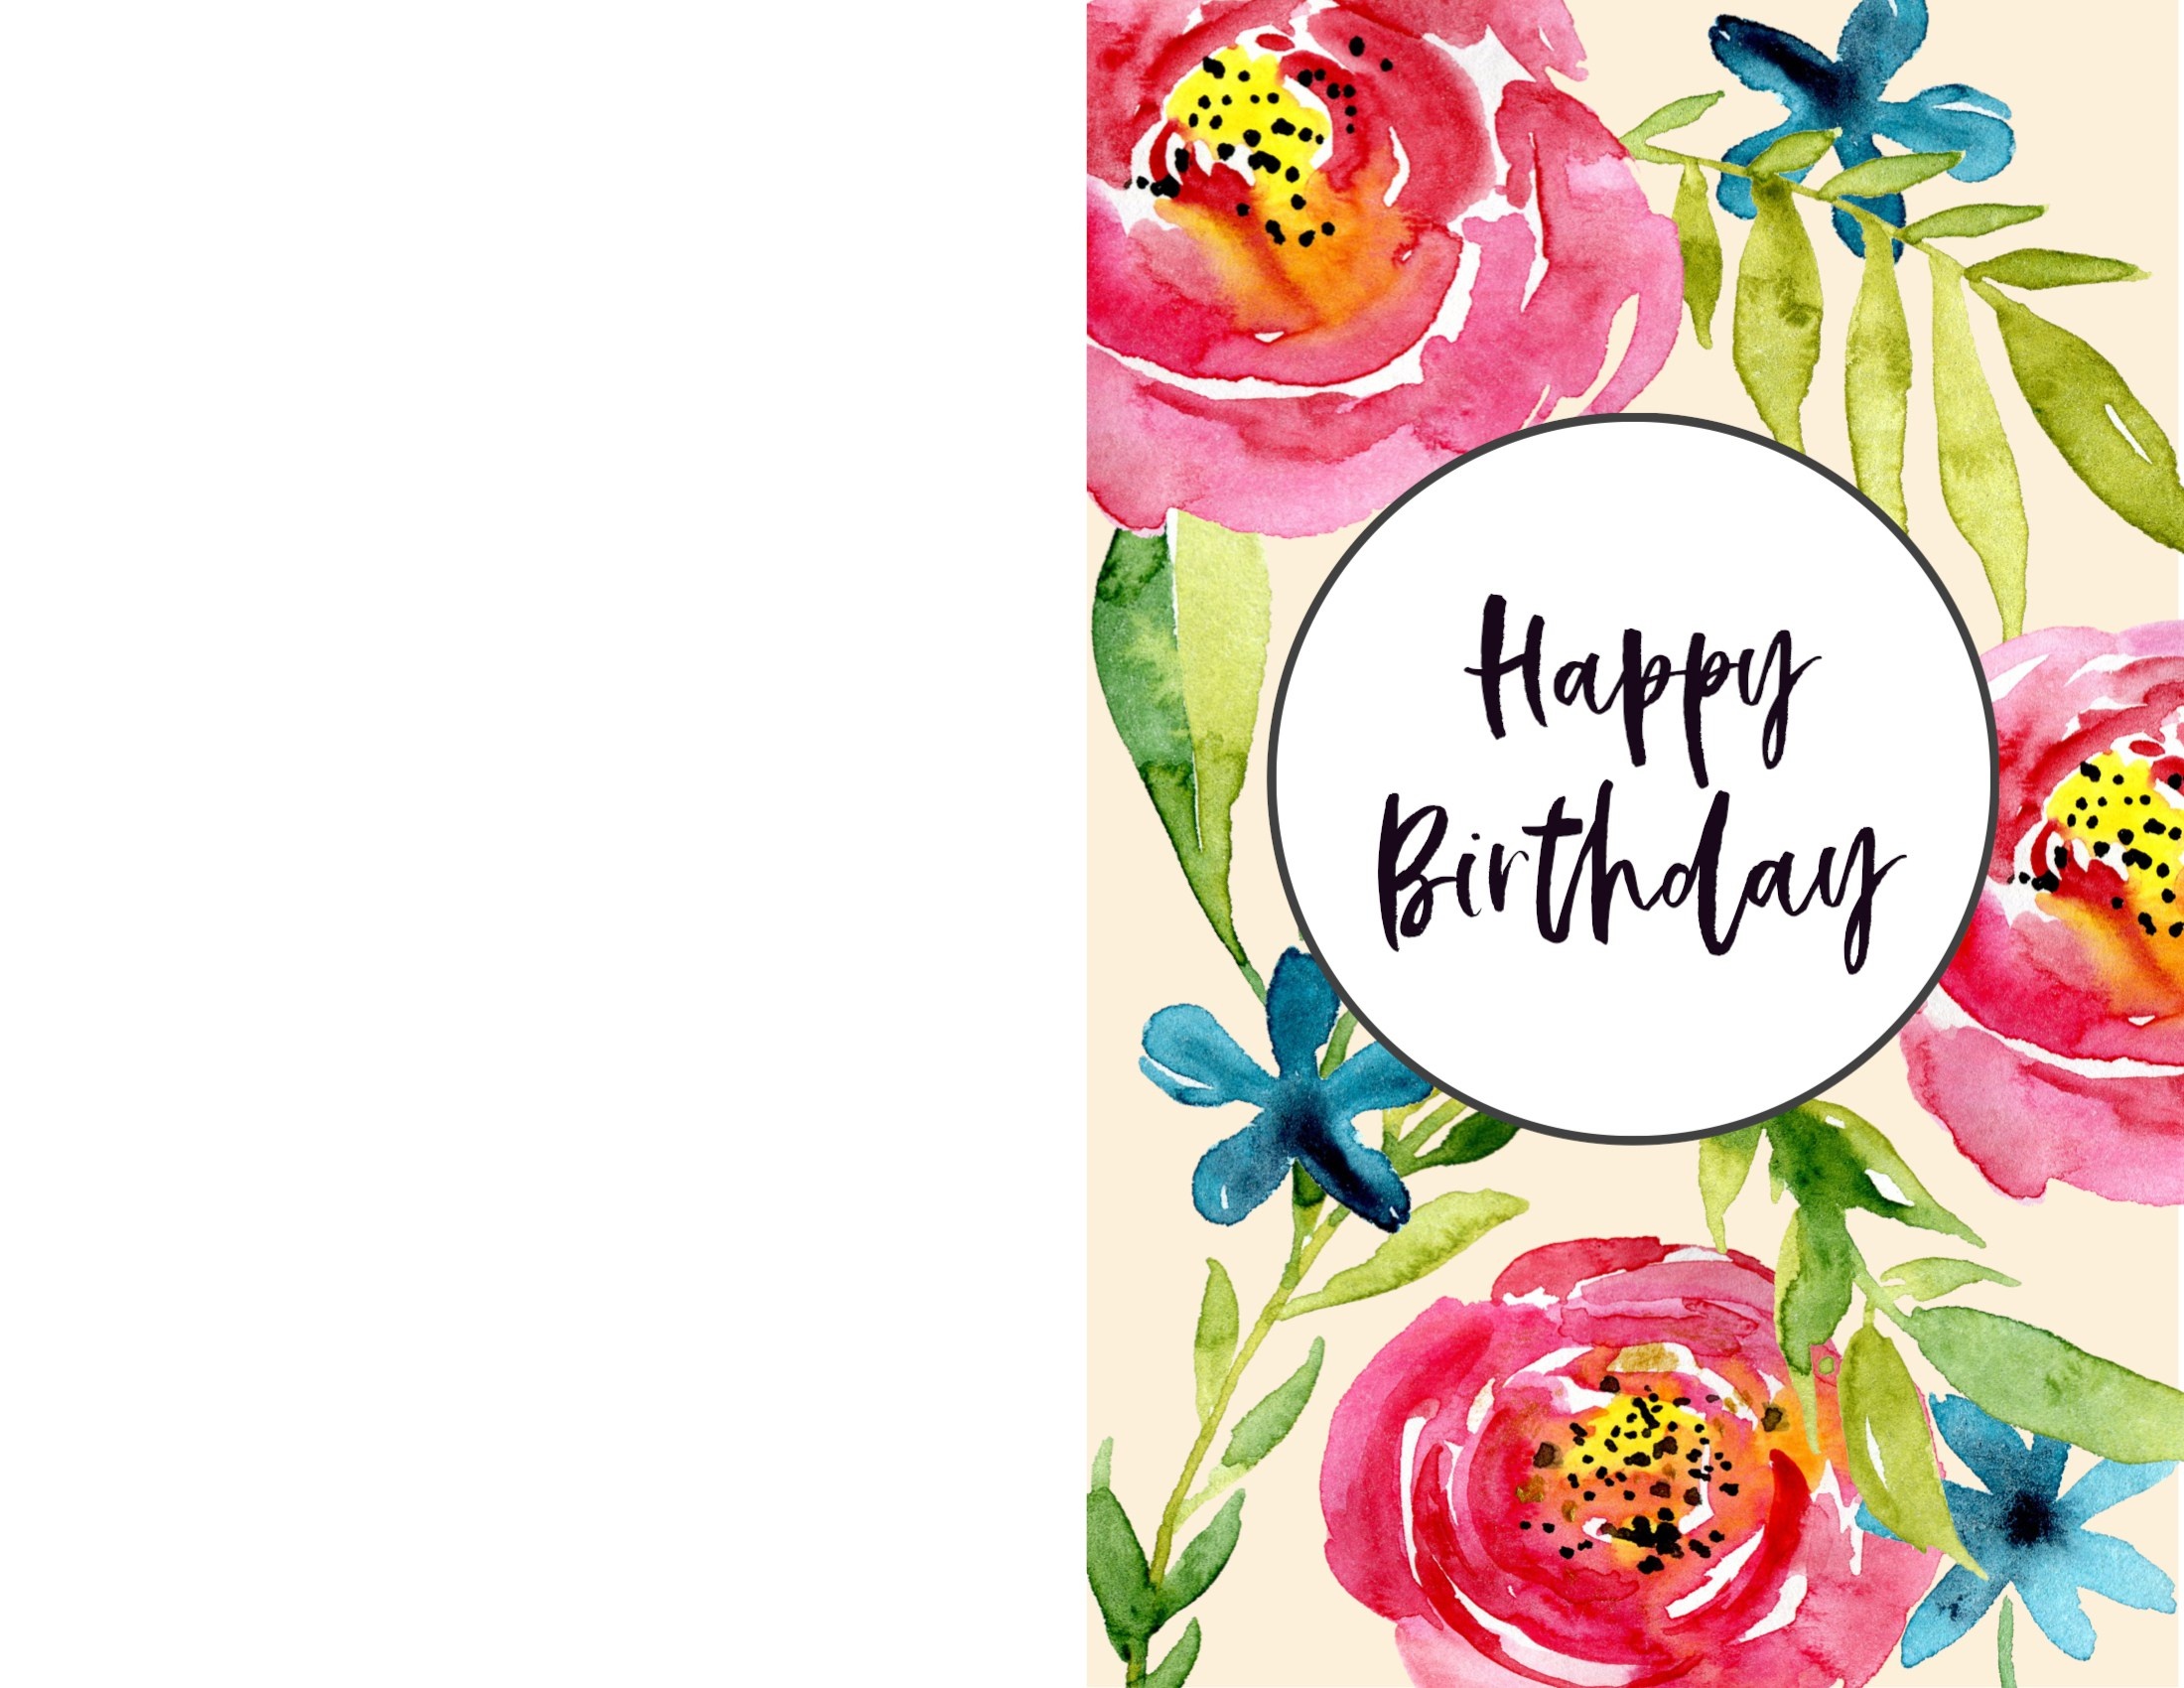 Free Printable Birthday Cards - Paper Trail Design - Free Printable Personalized Birthday Cards